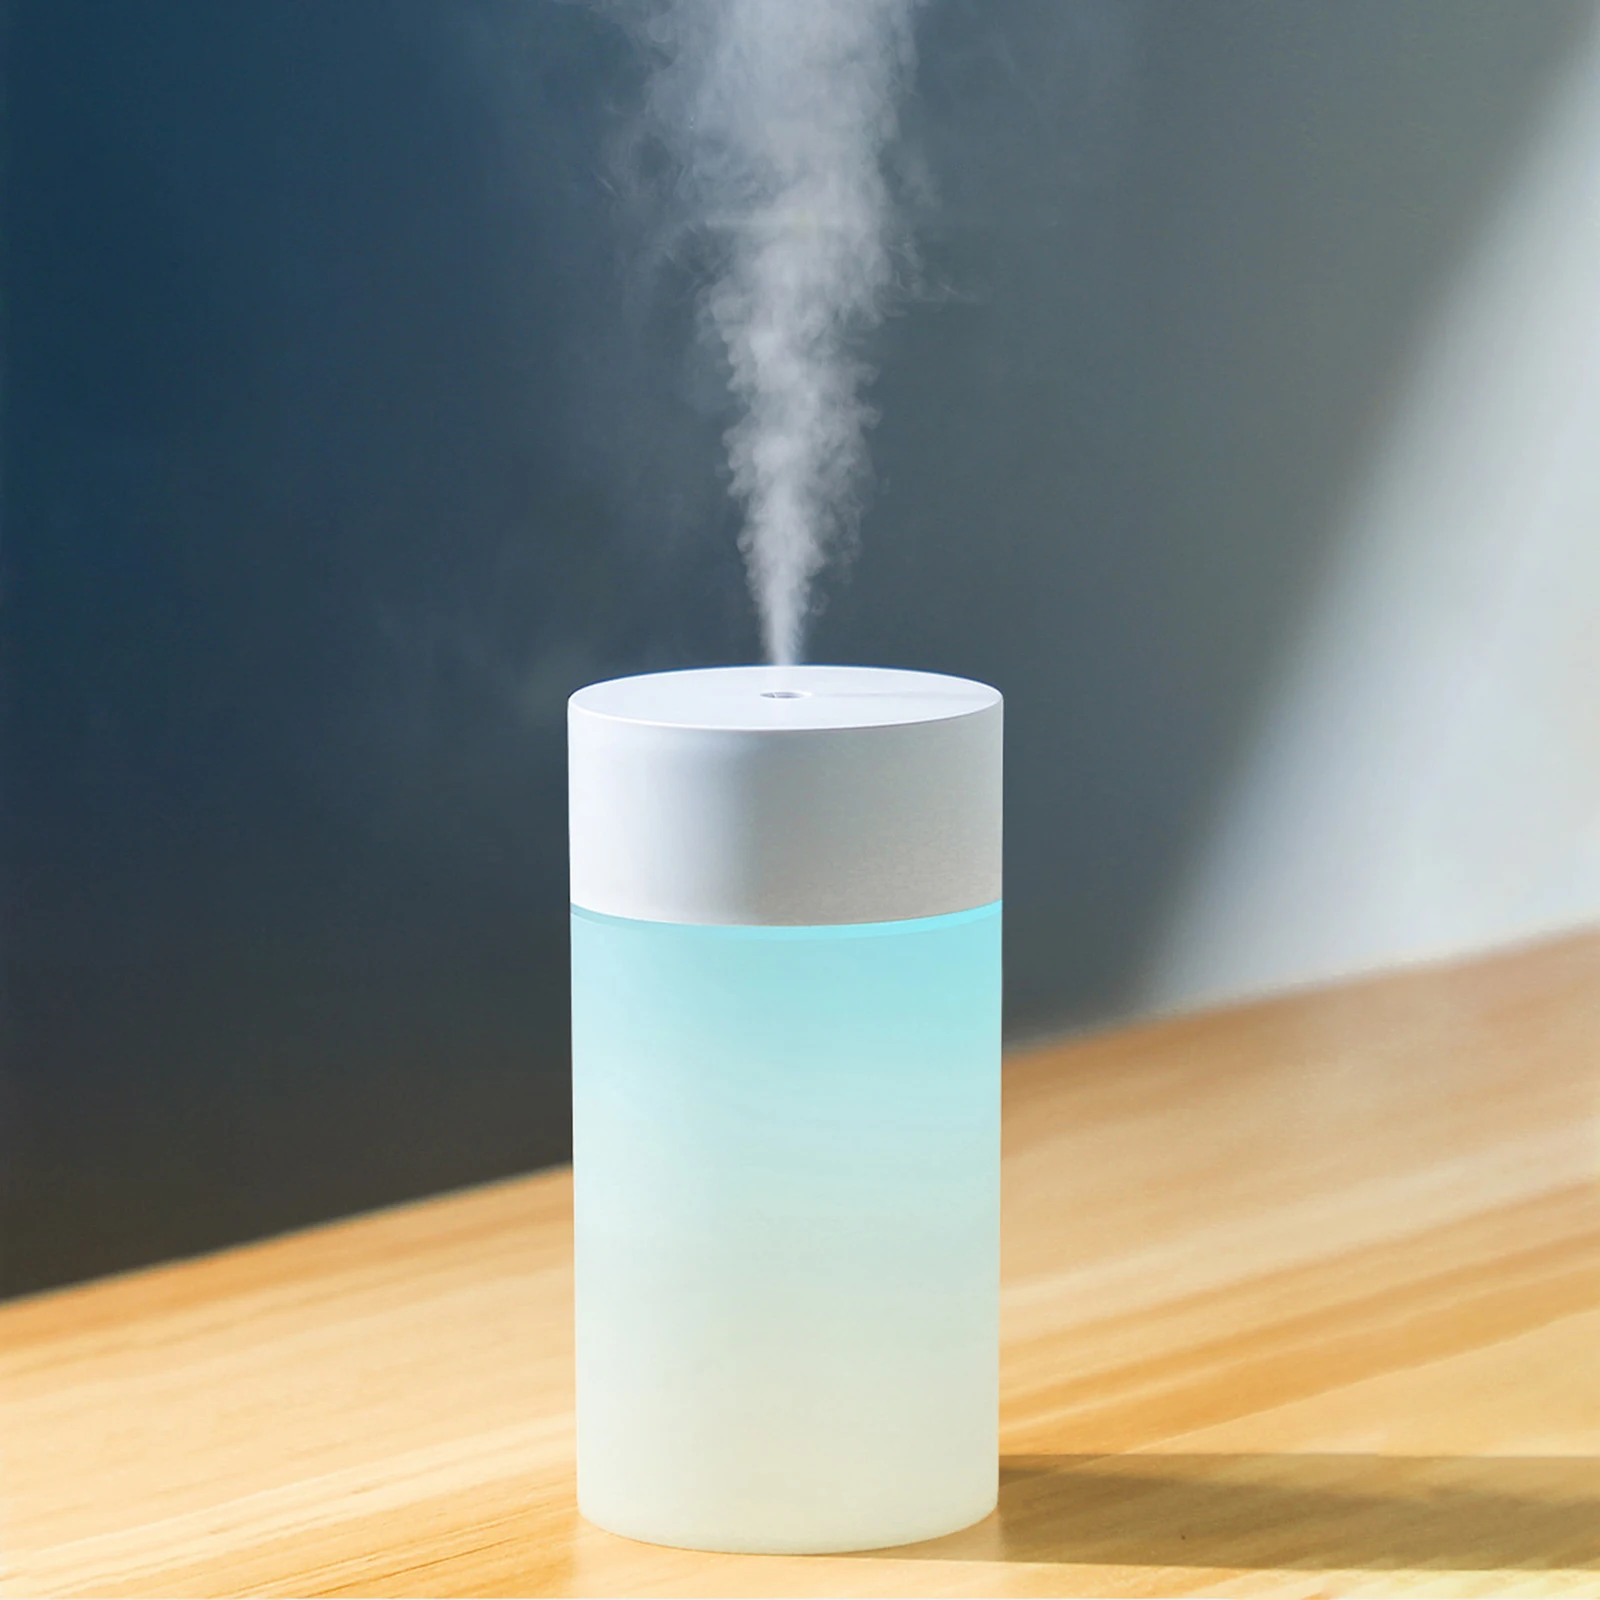 

260mL Mist Humidifier Diffuser Portable USB Air Humidifier Home Colorful Night Light Quiet Waterless Auto-Off Car Air Freshener